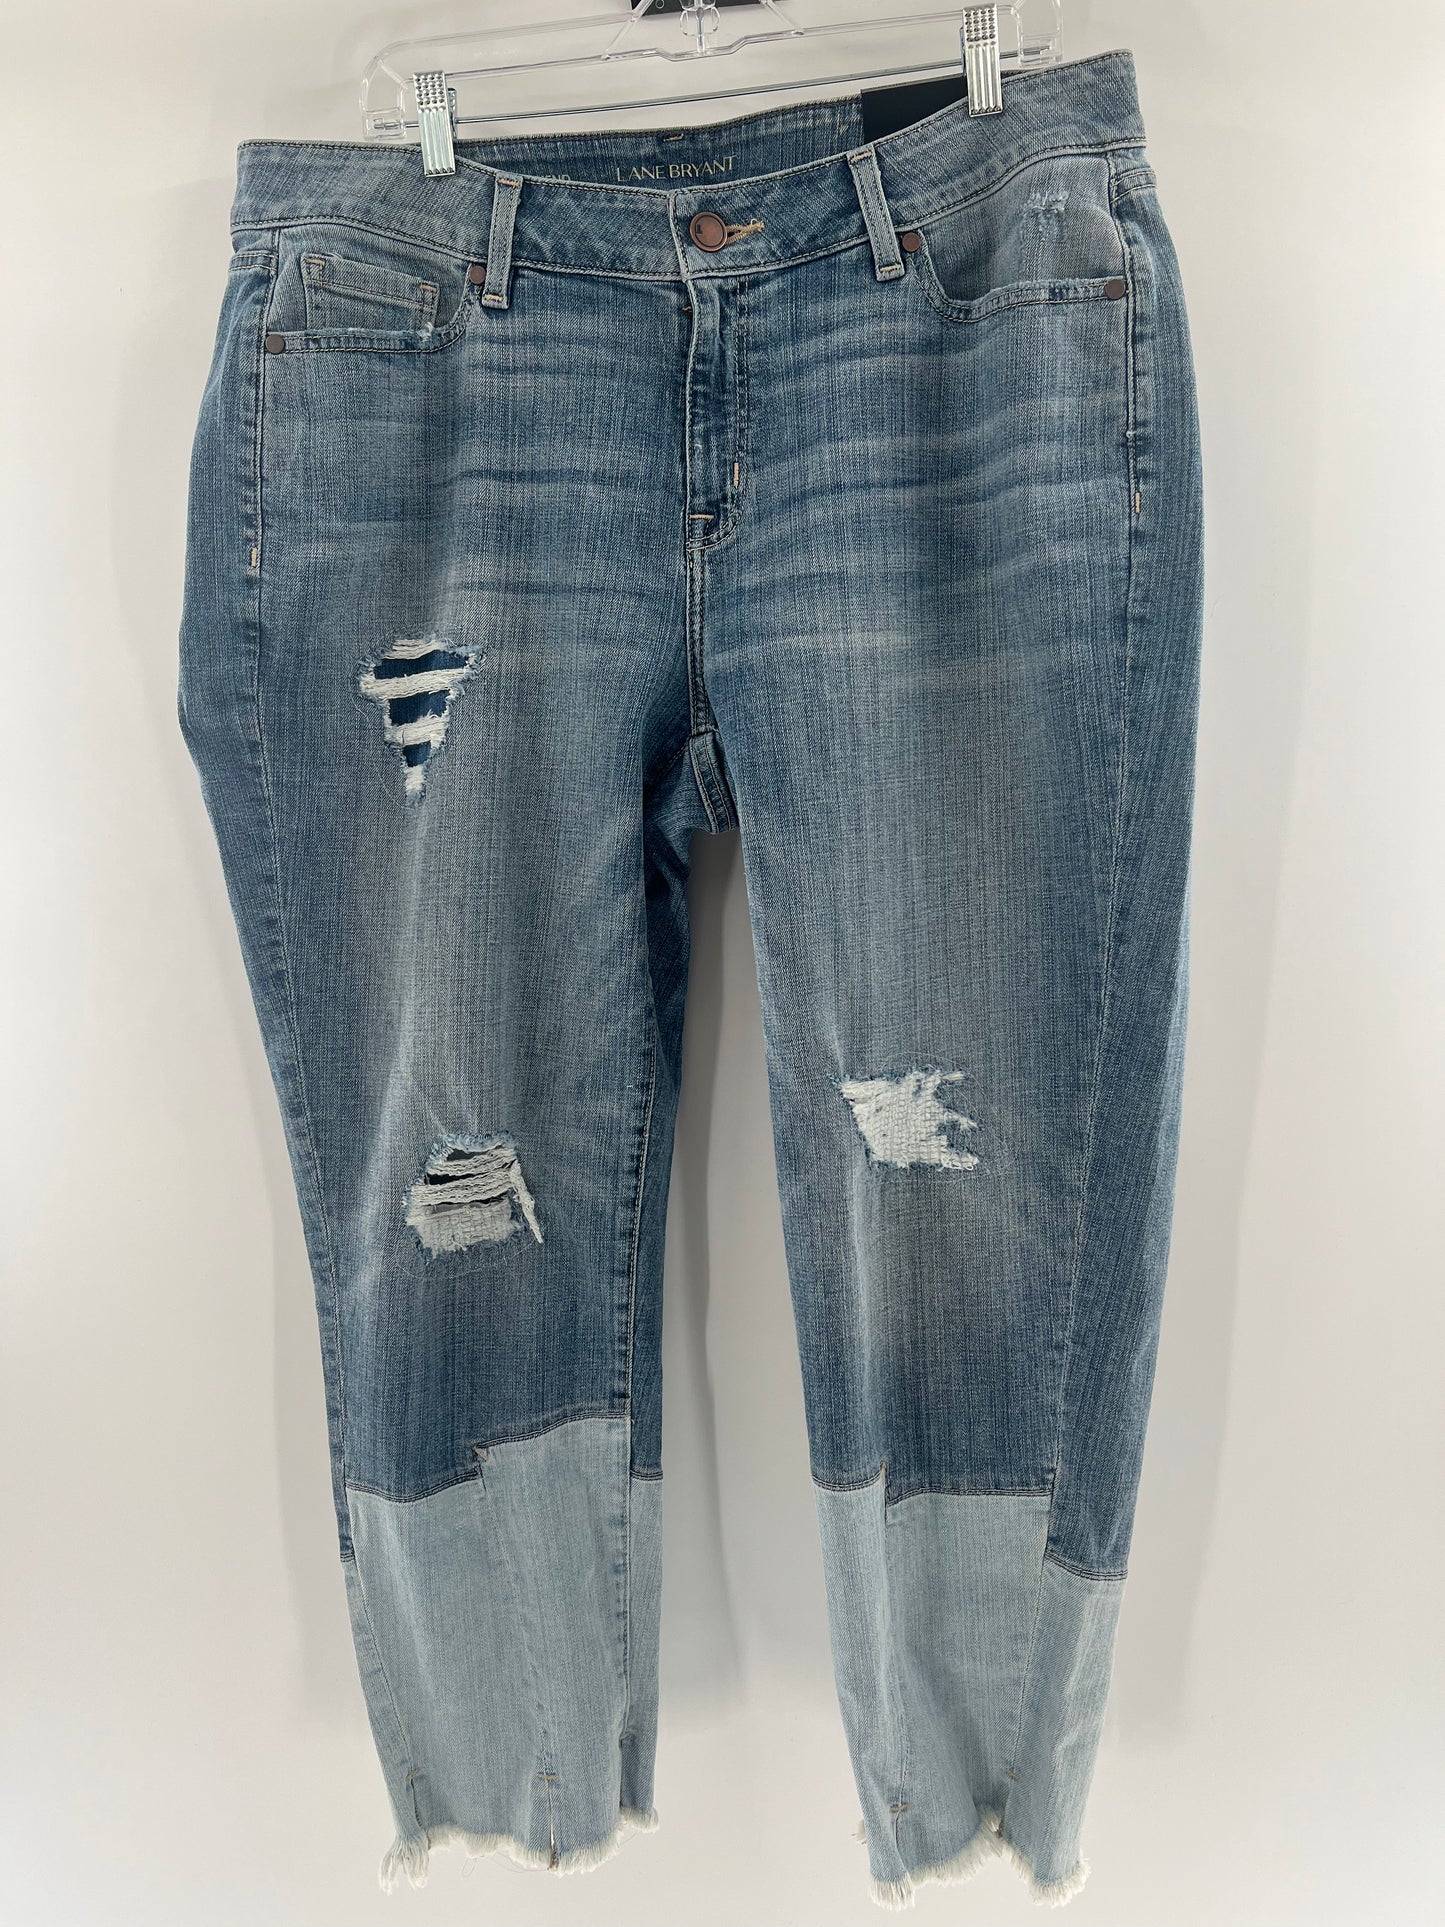 Lane Bryant Girlfriend Blue Tipped Patchwork Jeans (Size 16 R)